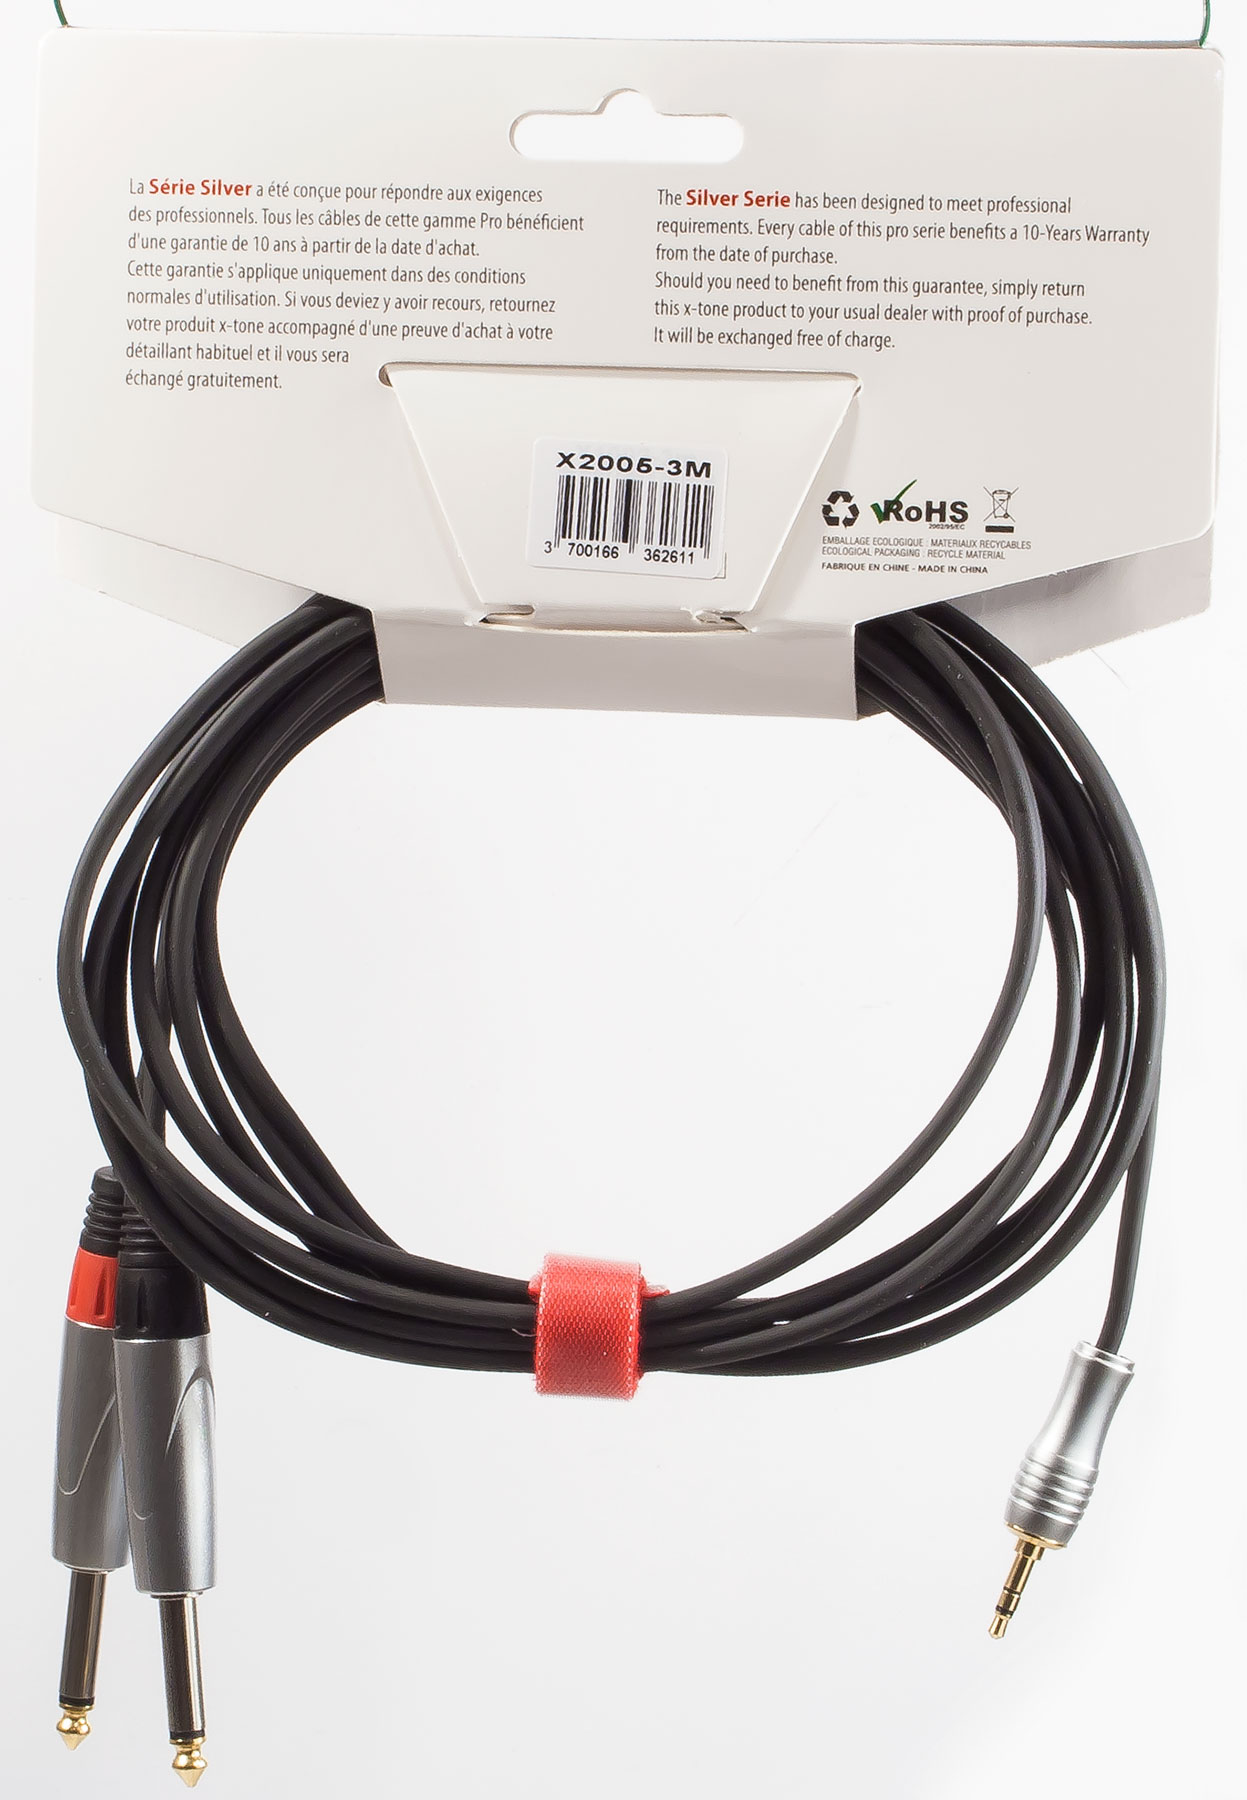 X-tone X2005-3m - Jack(m) 3,5 Stereo / 2 Jack(m) 6,35 Mono Silver Series - Cable - Variation 1